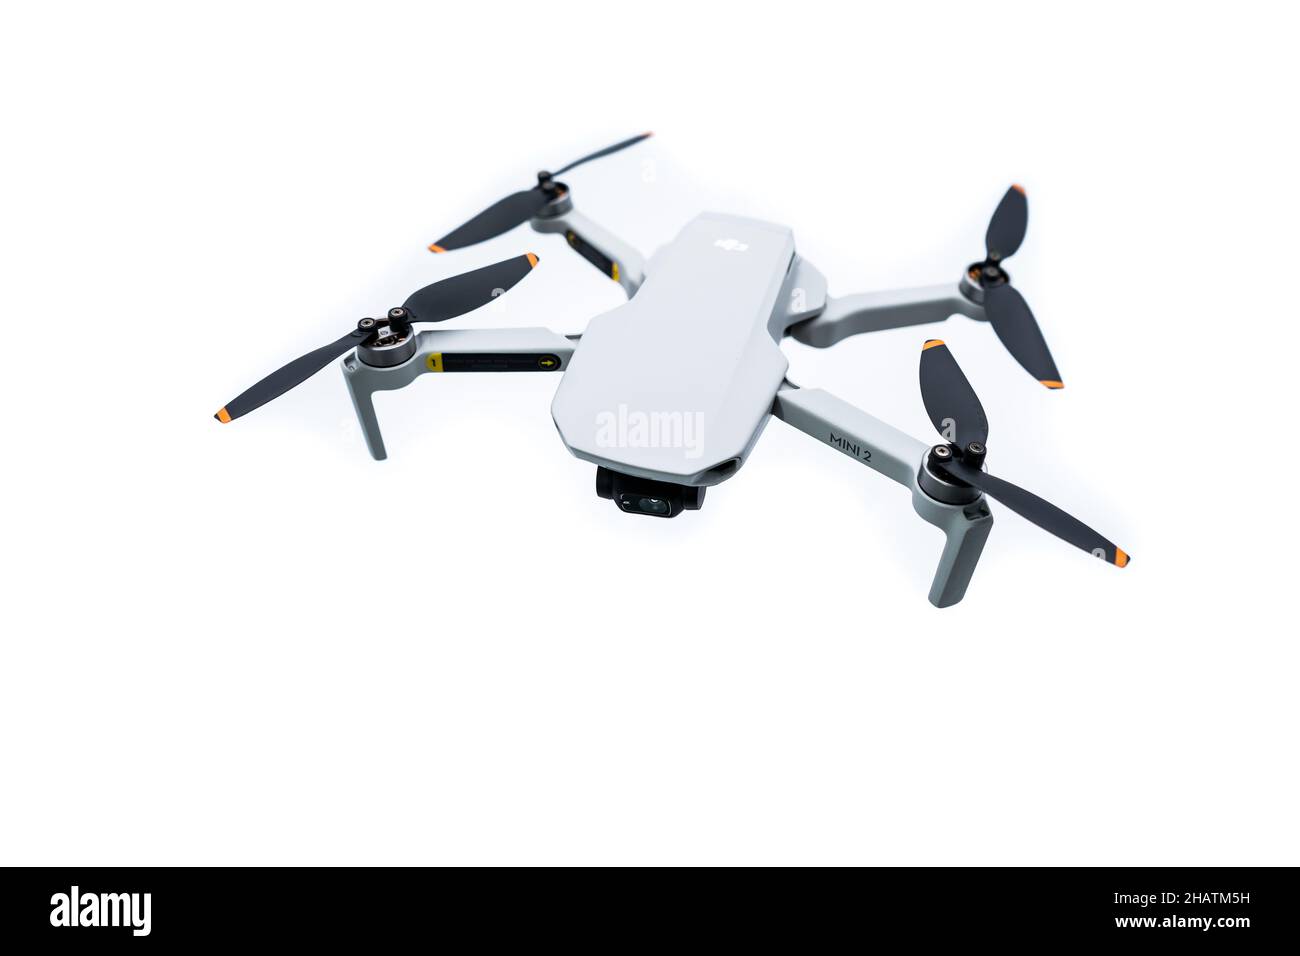 Valencia, Spain - December 13, 2021: Top view of Dji mini 2 drone isolated  on white background Stock Photo - Alamy